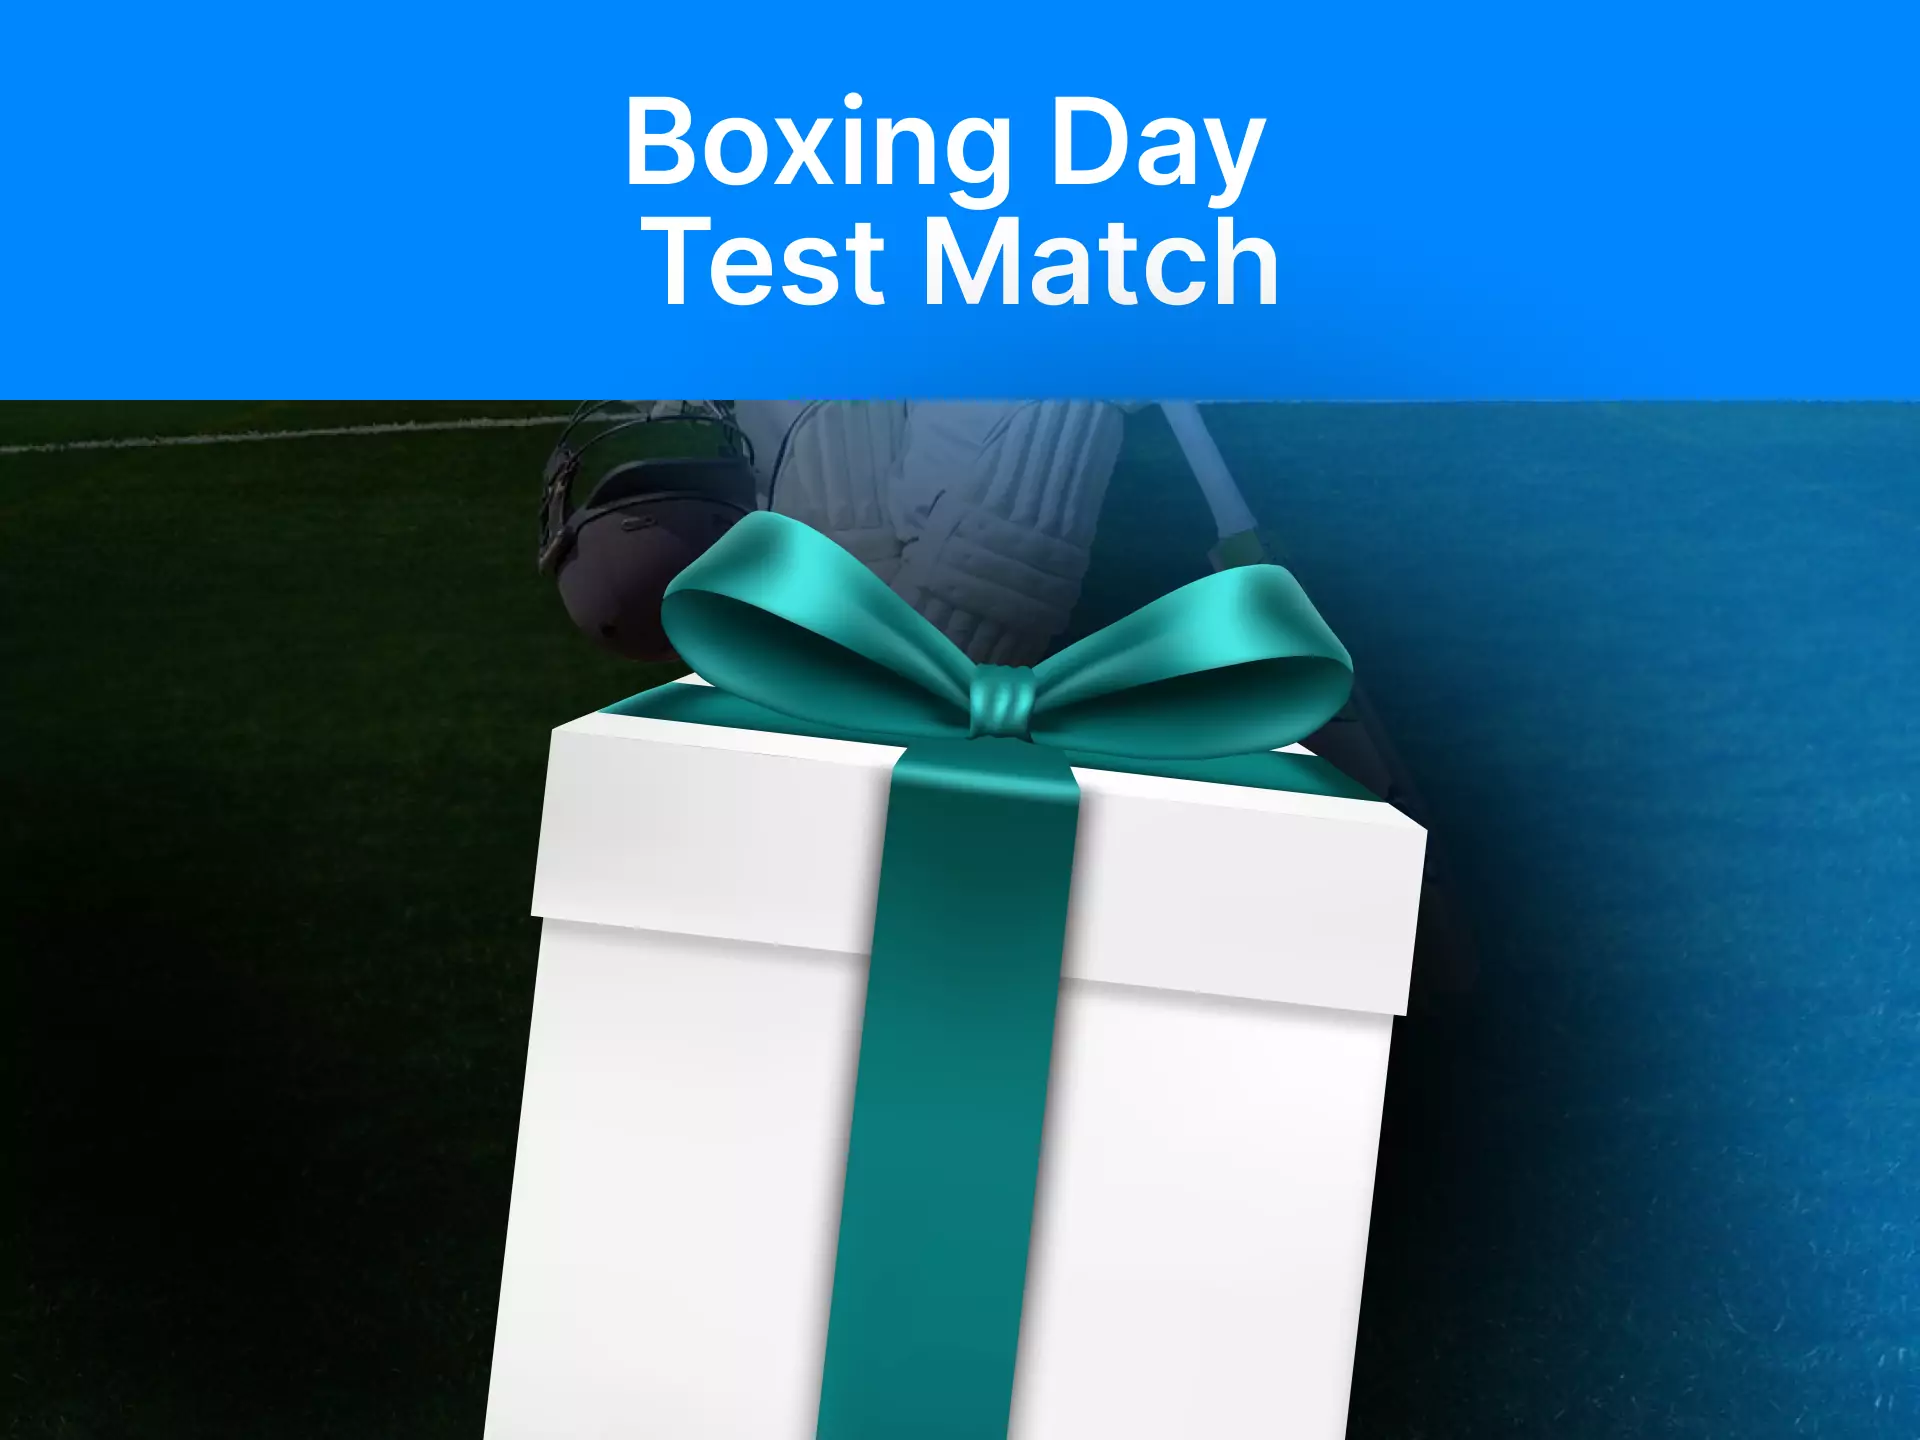 Find out why and when Test Matches are played on Boxing Day.